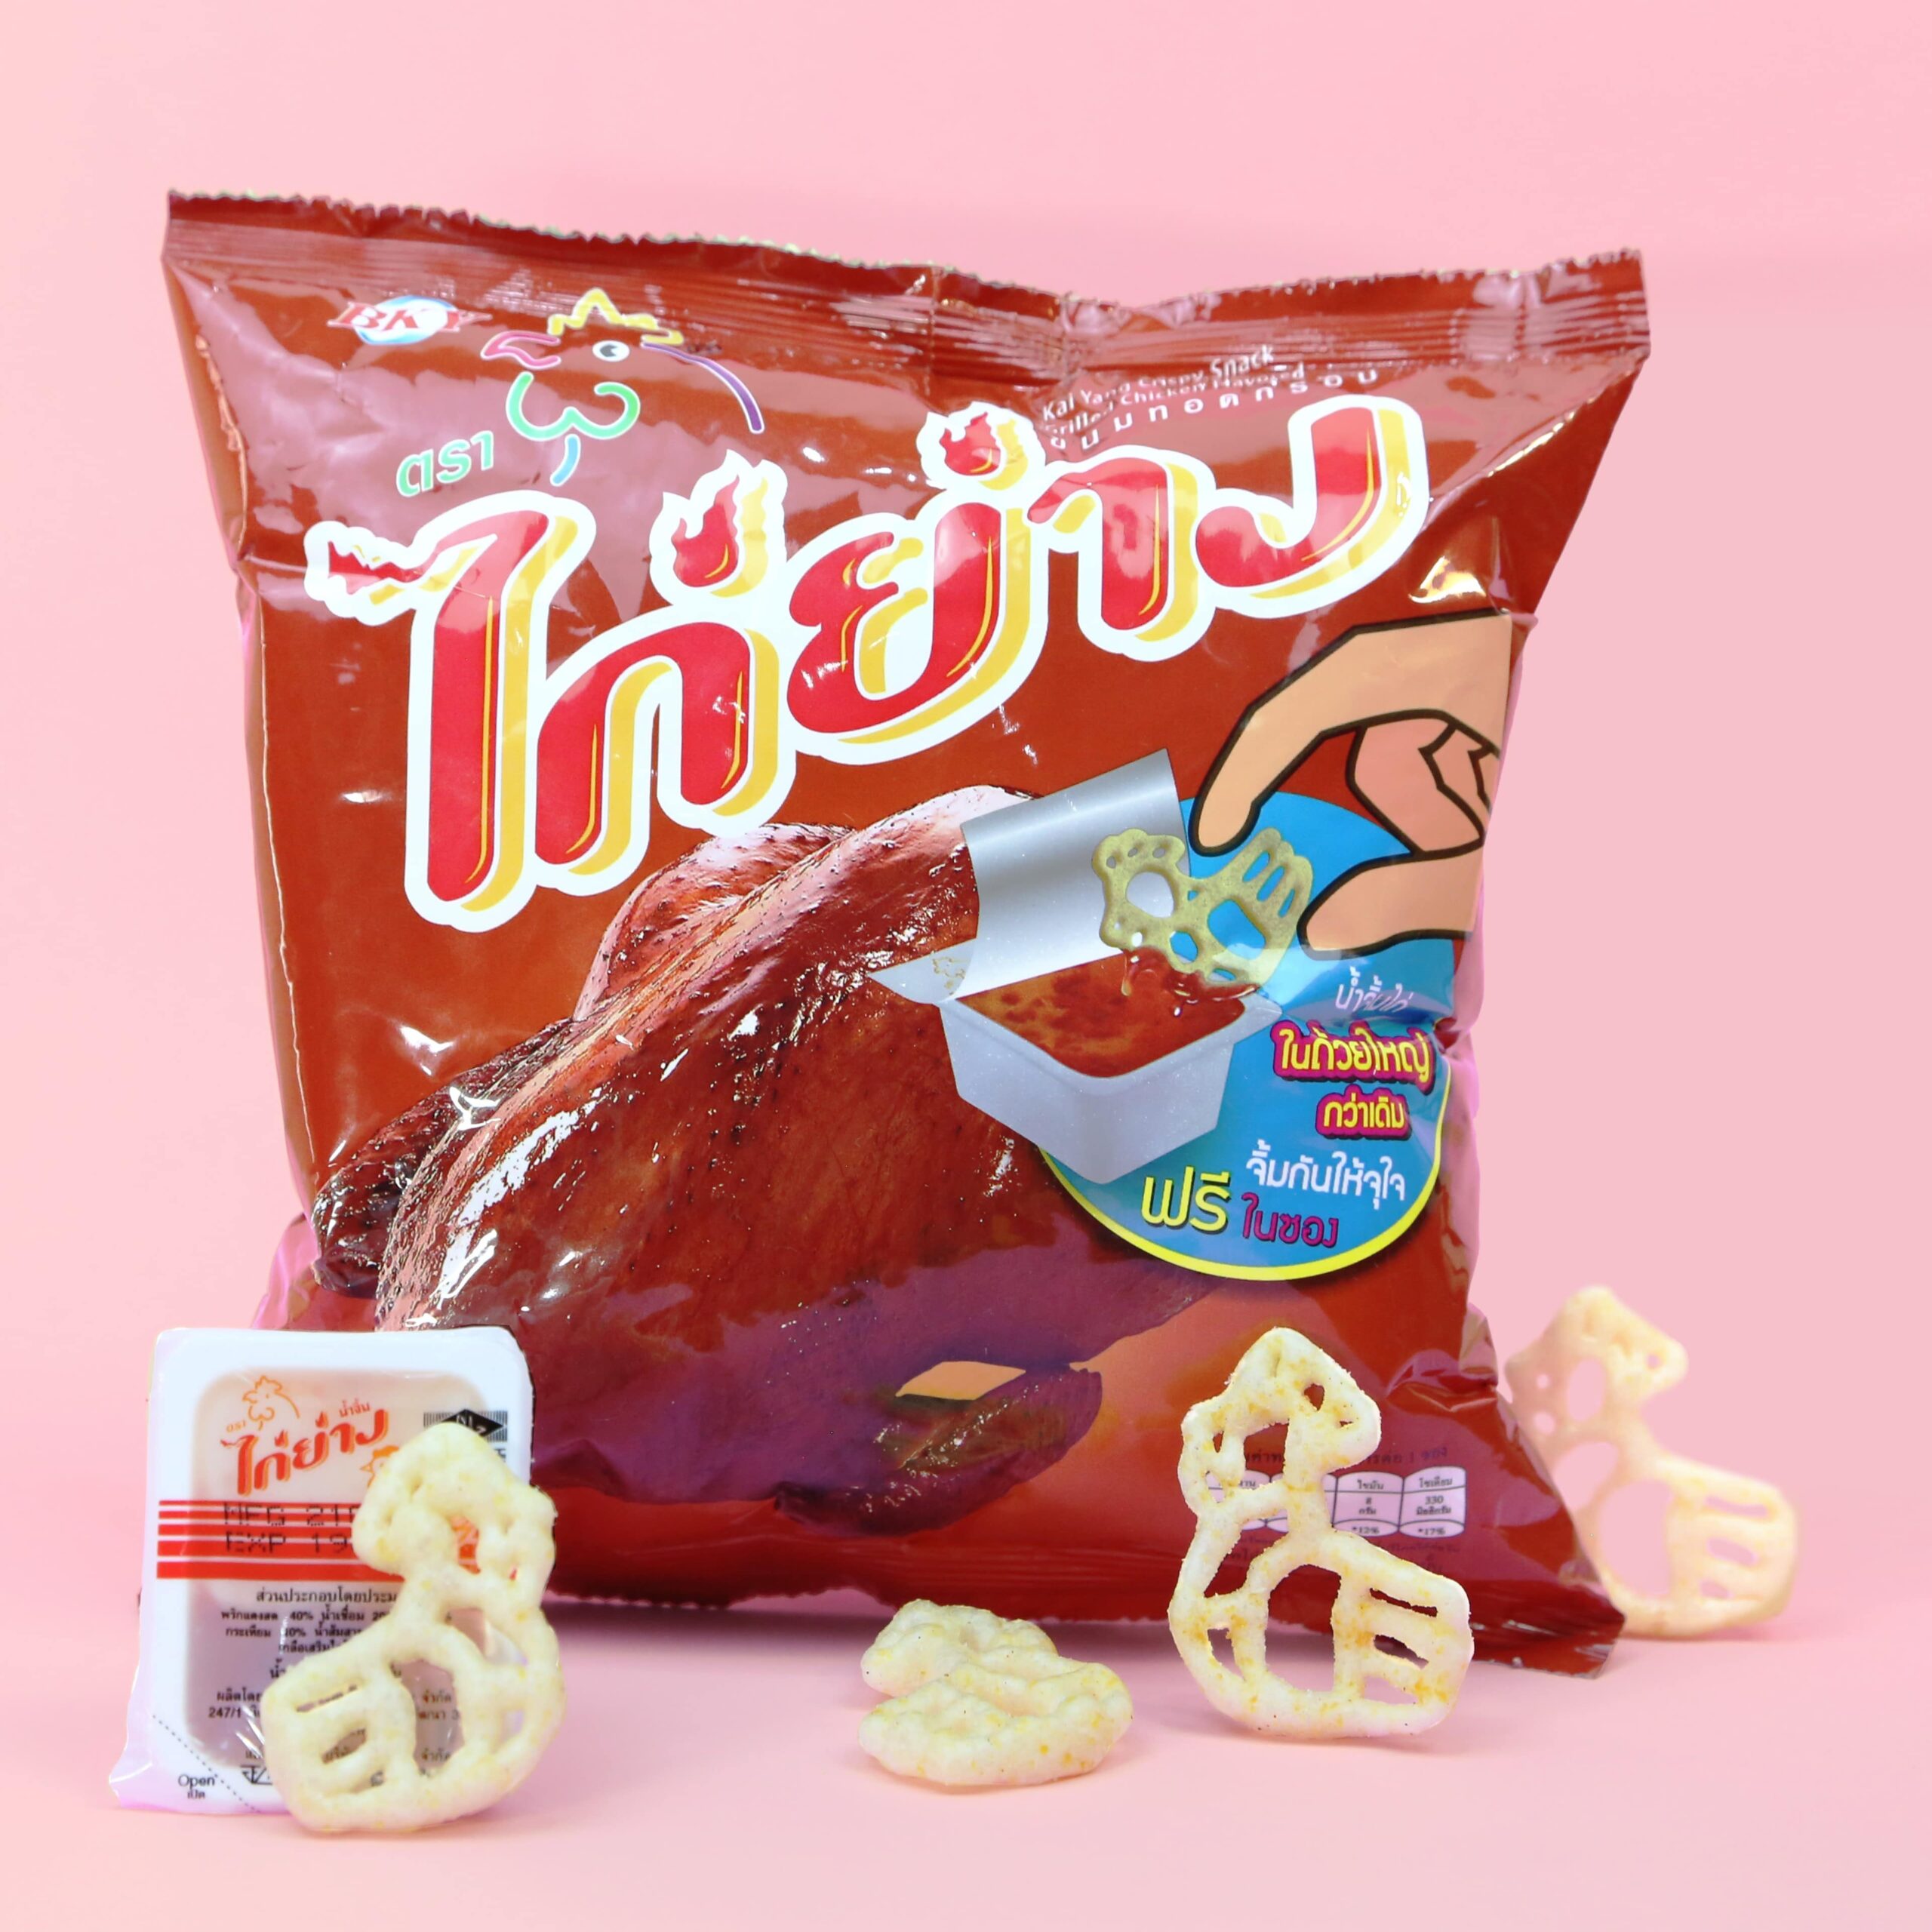 Kai yaang Grilled chicken flavored snack included in Heap Brand authentic Thai snack subscription box. Local Thai snacks and unique Thai souvenir